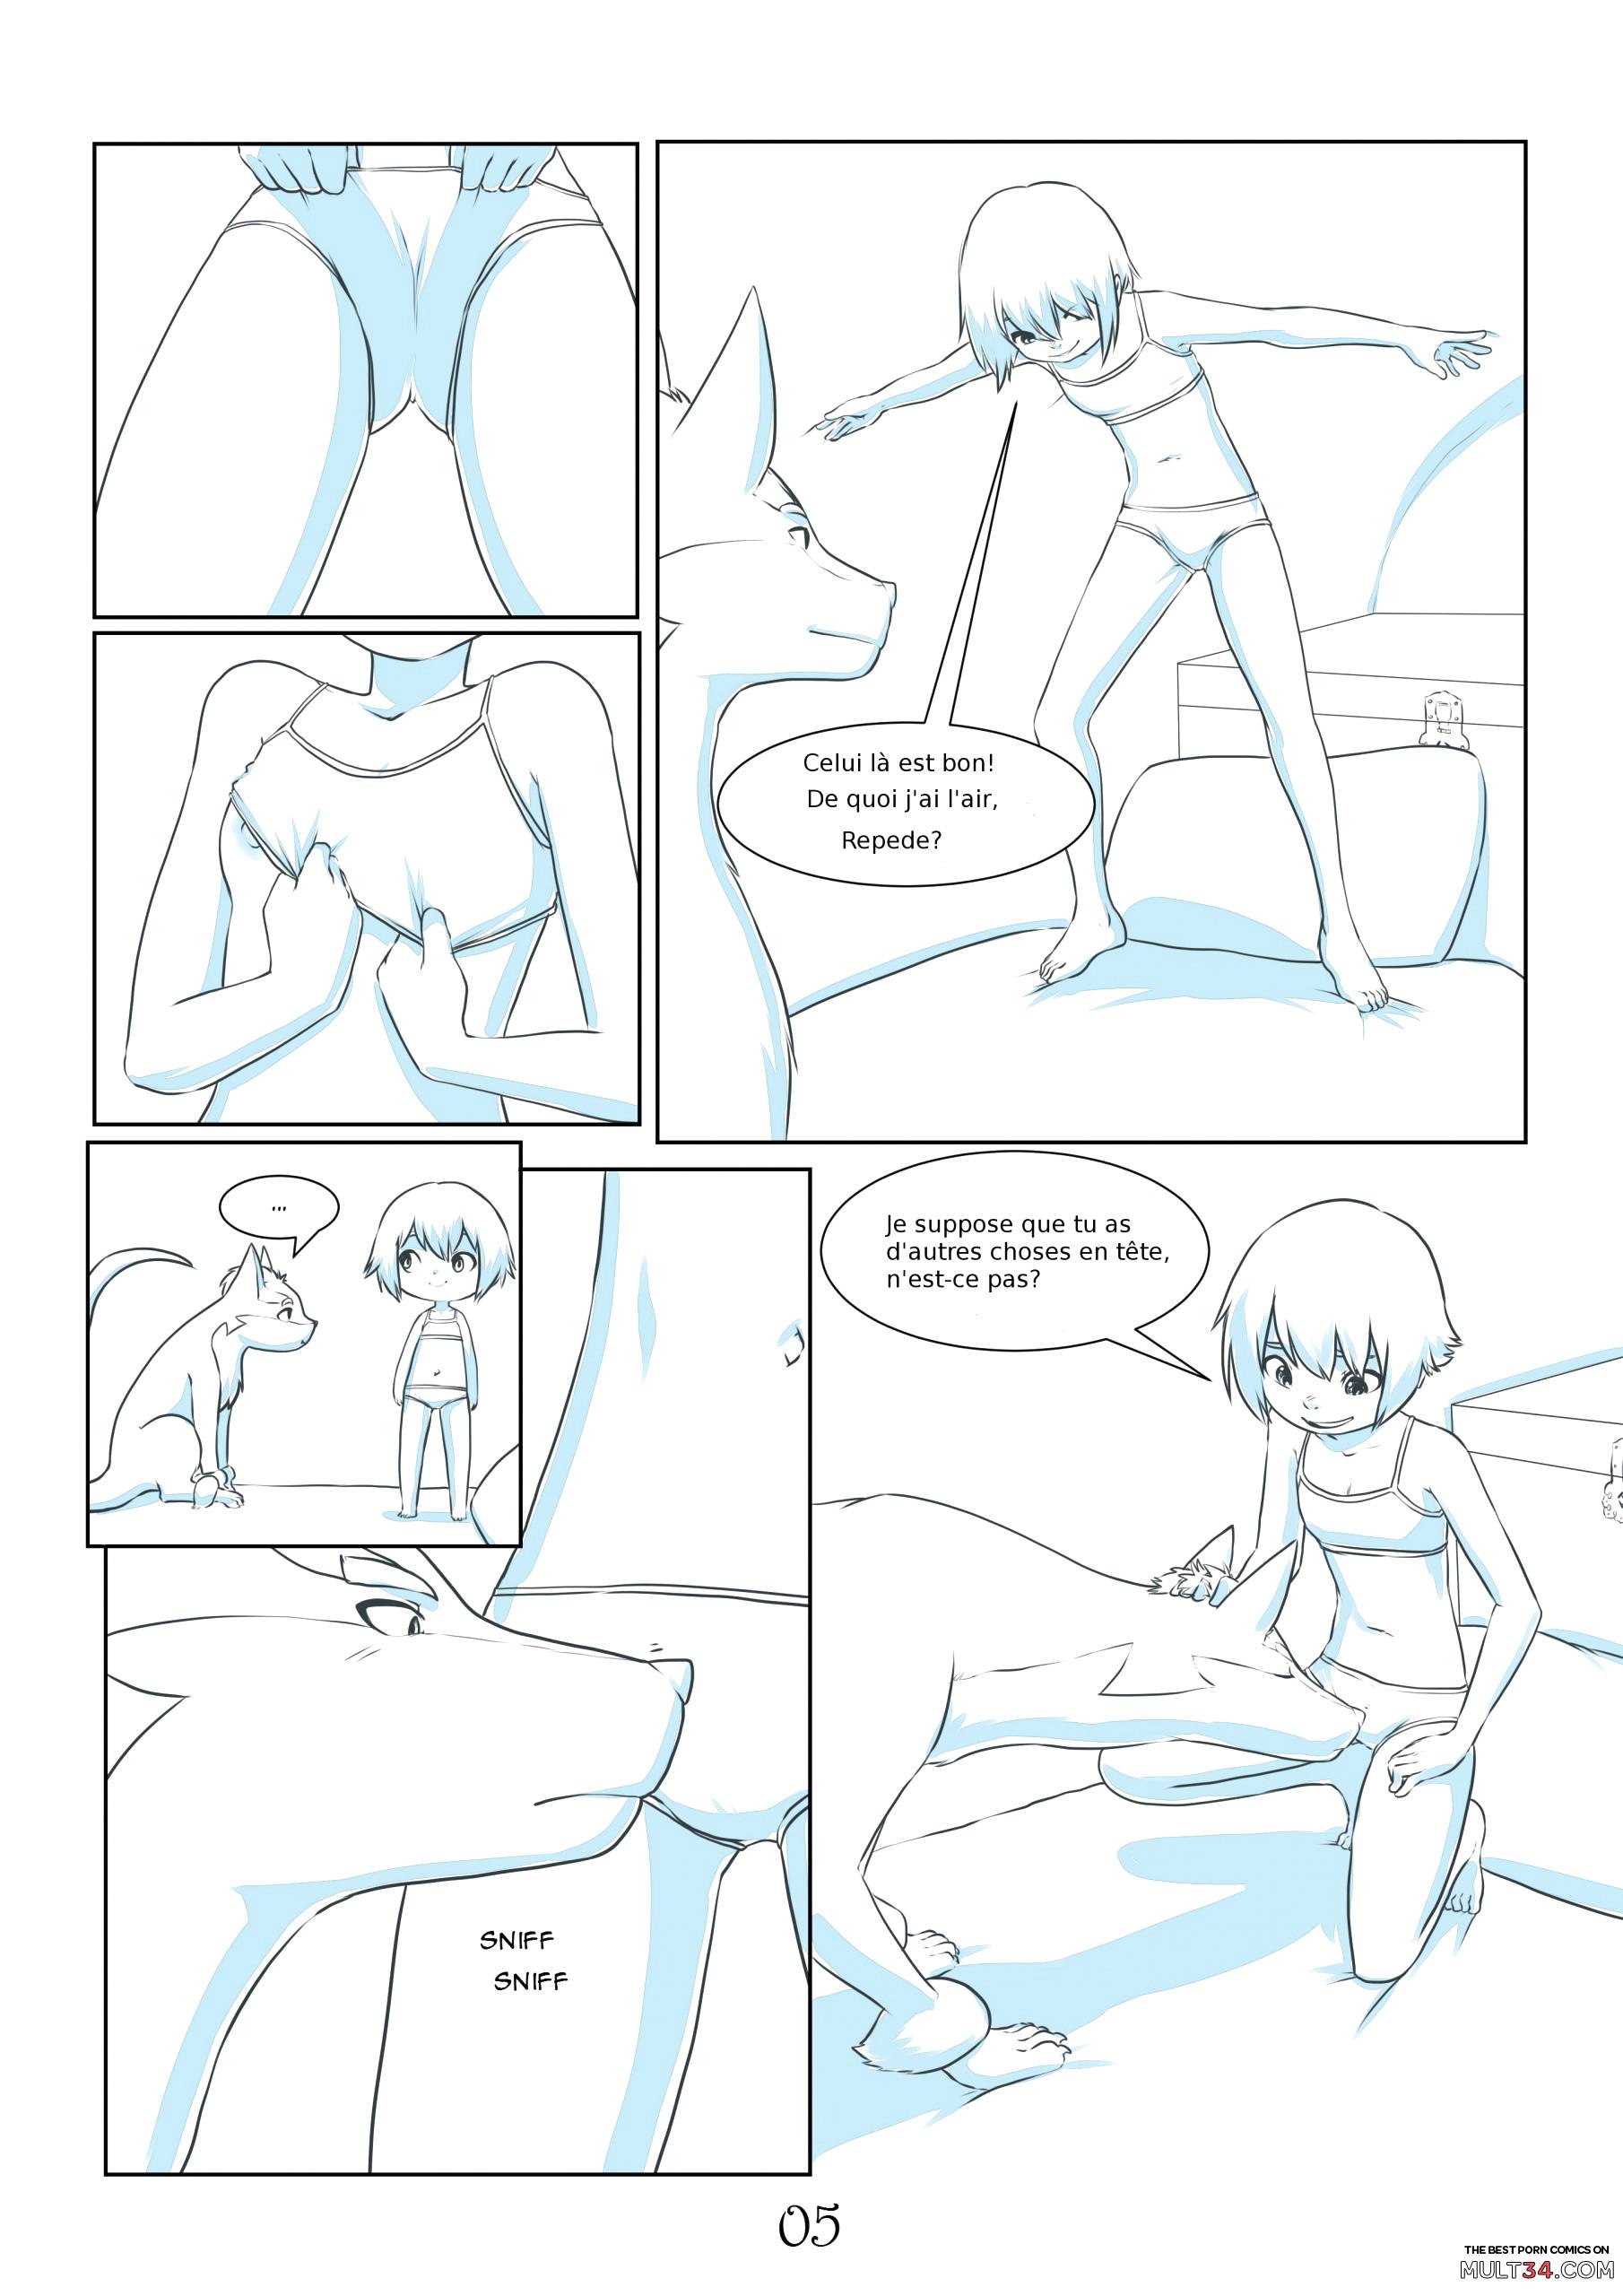 Tales of Rita and Repede - Episode 2 page 6